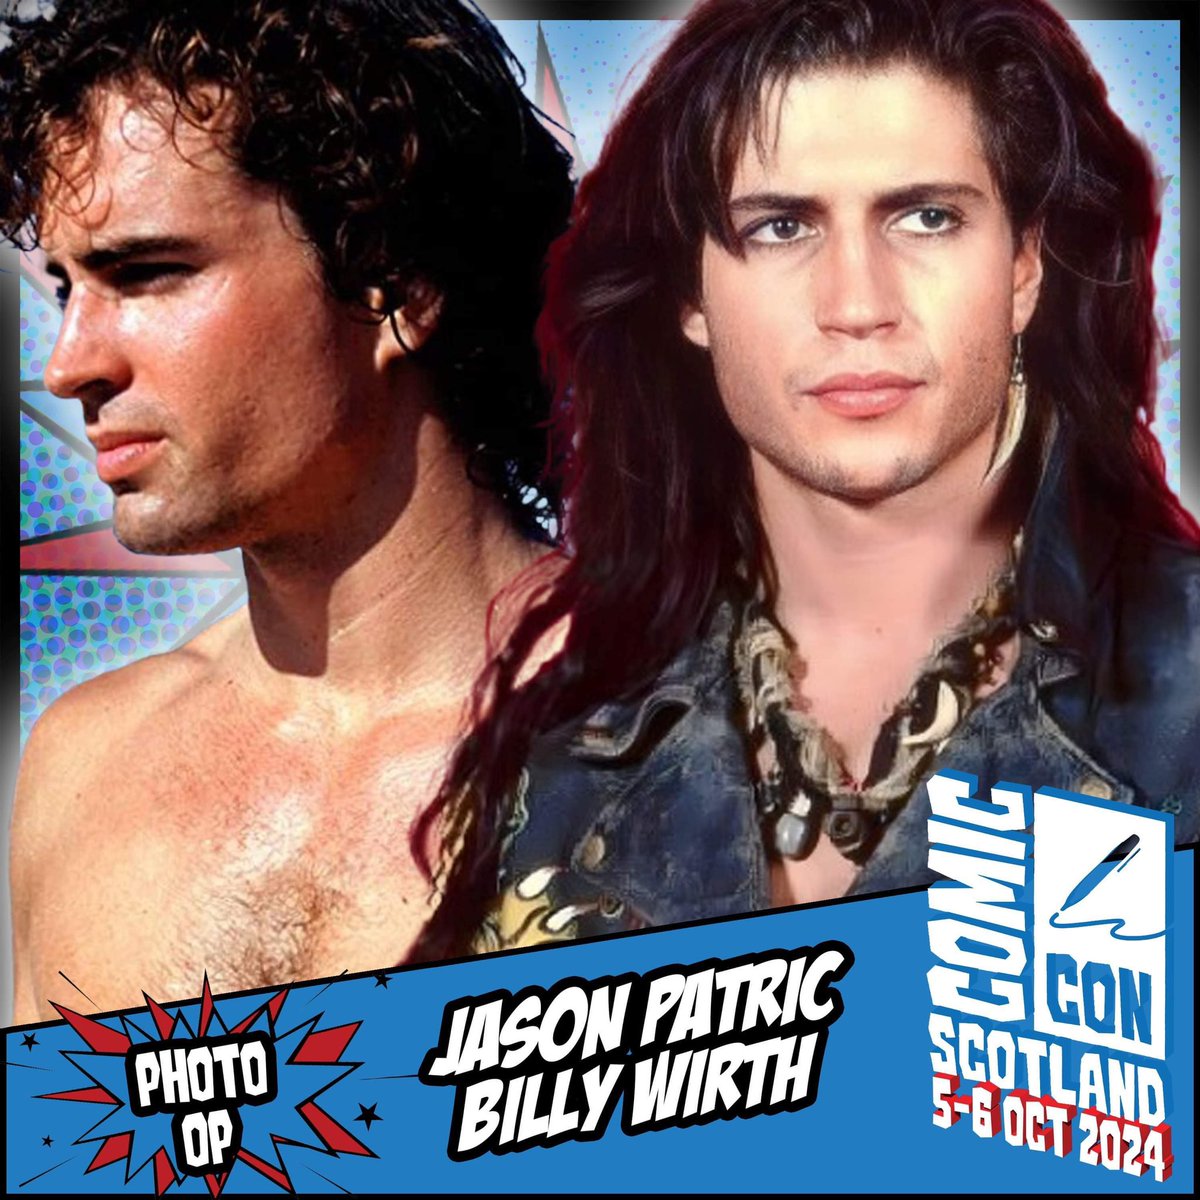 LOST BOYS DUO PHOTO Comic Con Scotland presents a duo photograph opportunity with Jason and Billy! Tickets: comicconventionscotland.co.uk